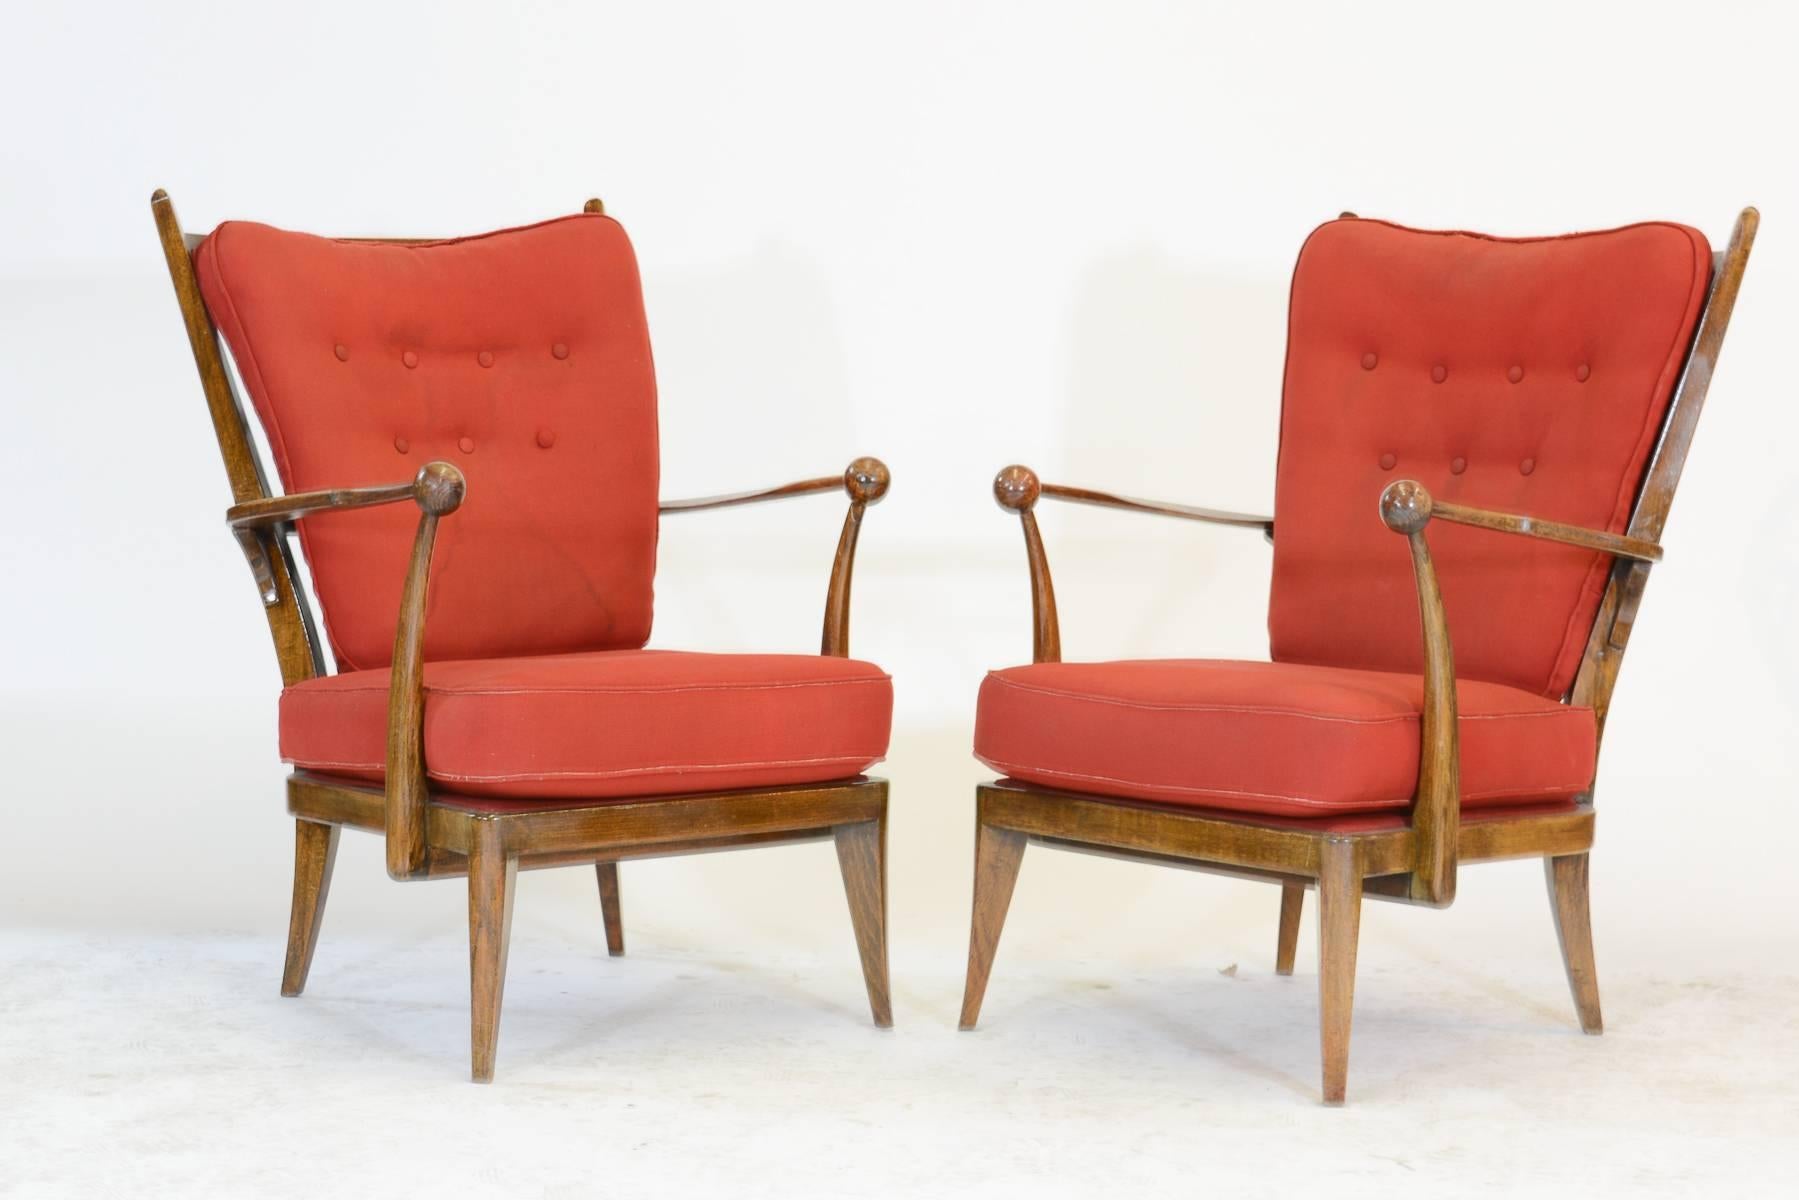 A beautiful early pair of French walnut high back club chair inspired by Guillermes and Chambron for Votre Maison.  They have the Prouvre legs and have a high level of craftmanship